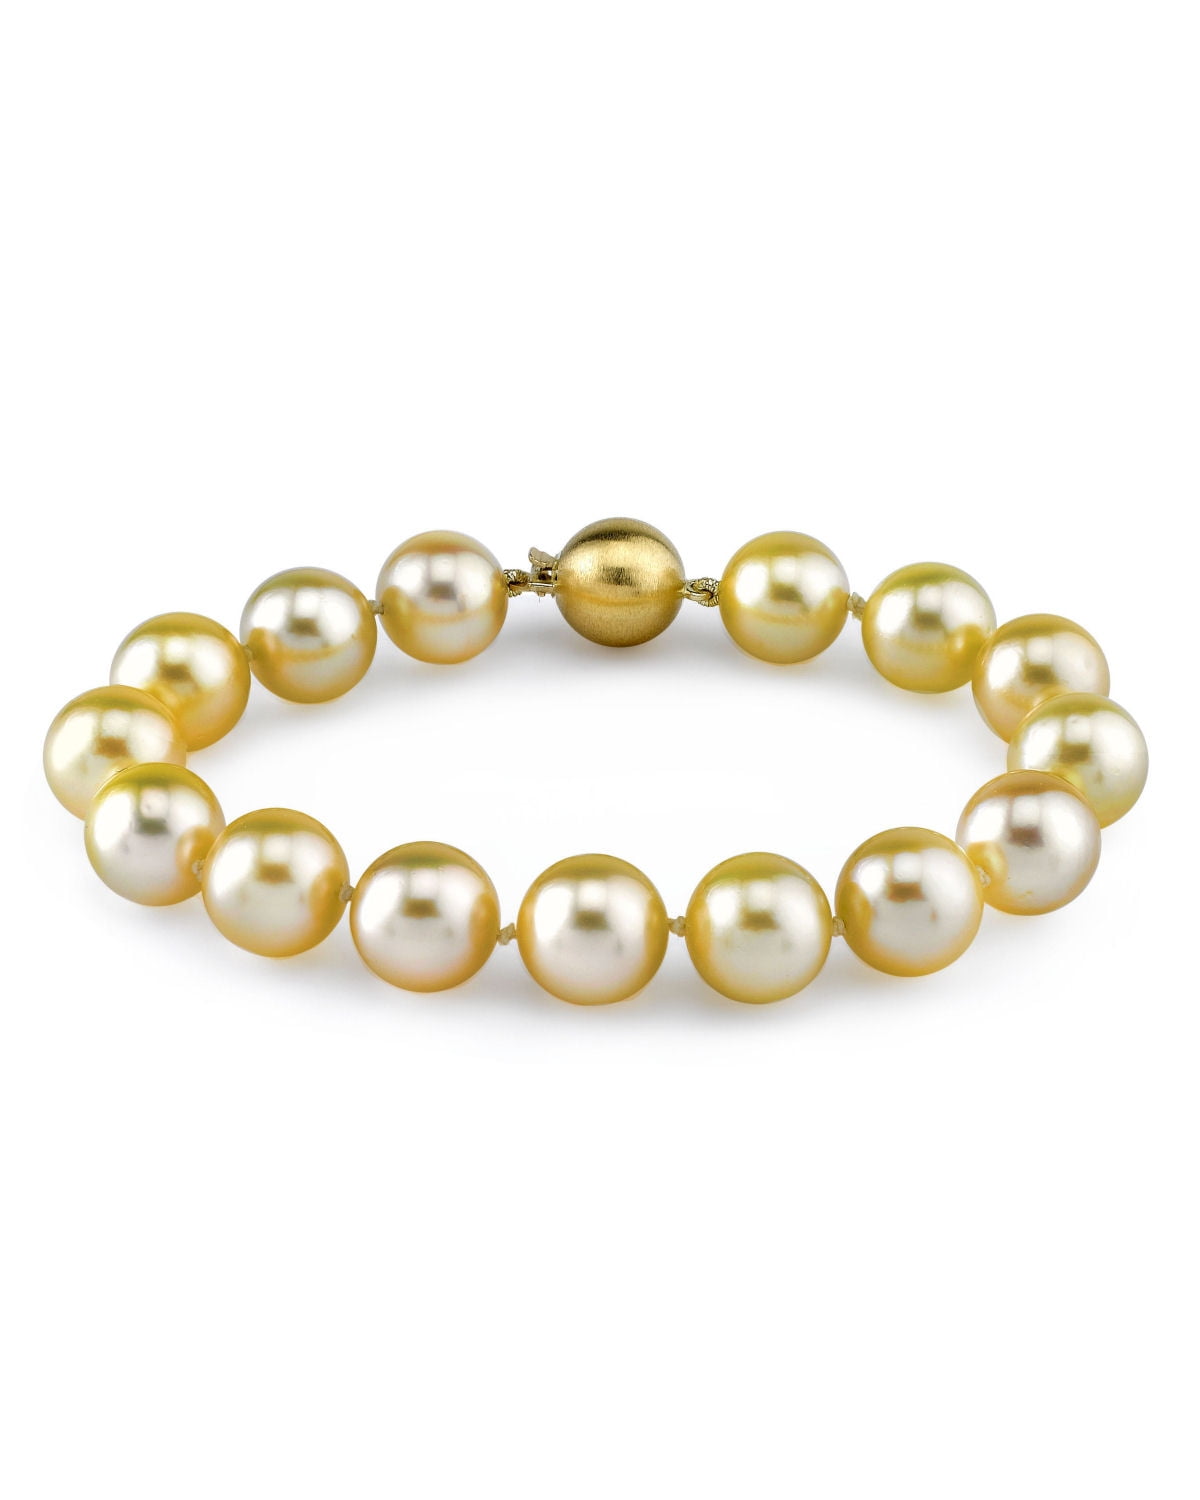 NEW round 38" AAA 7-8 MM SOUTH SEA NATURAL GOLD PEARL NECKLACE SILVER CLASP 